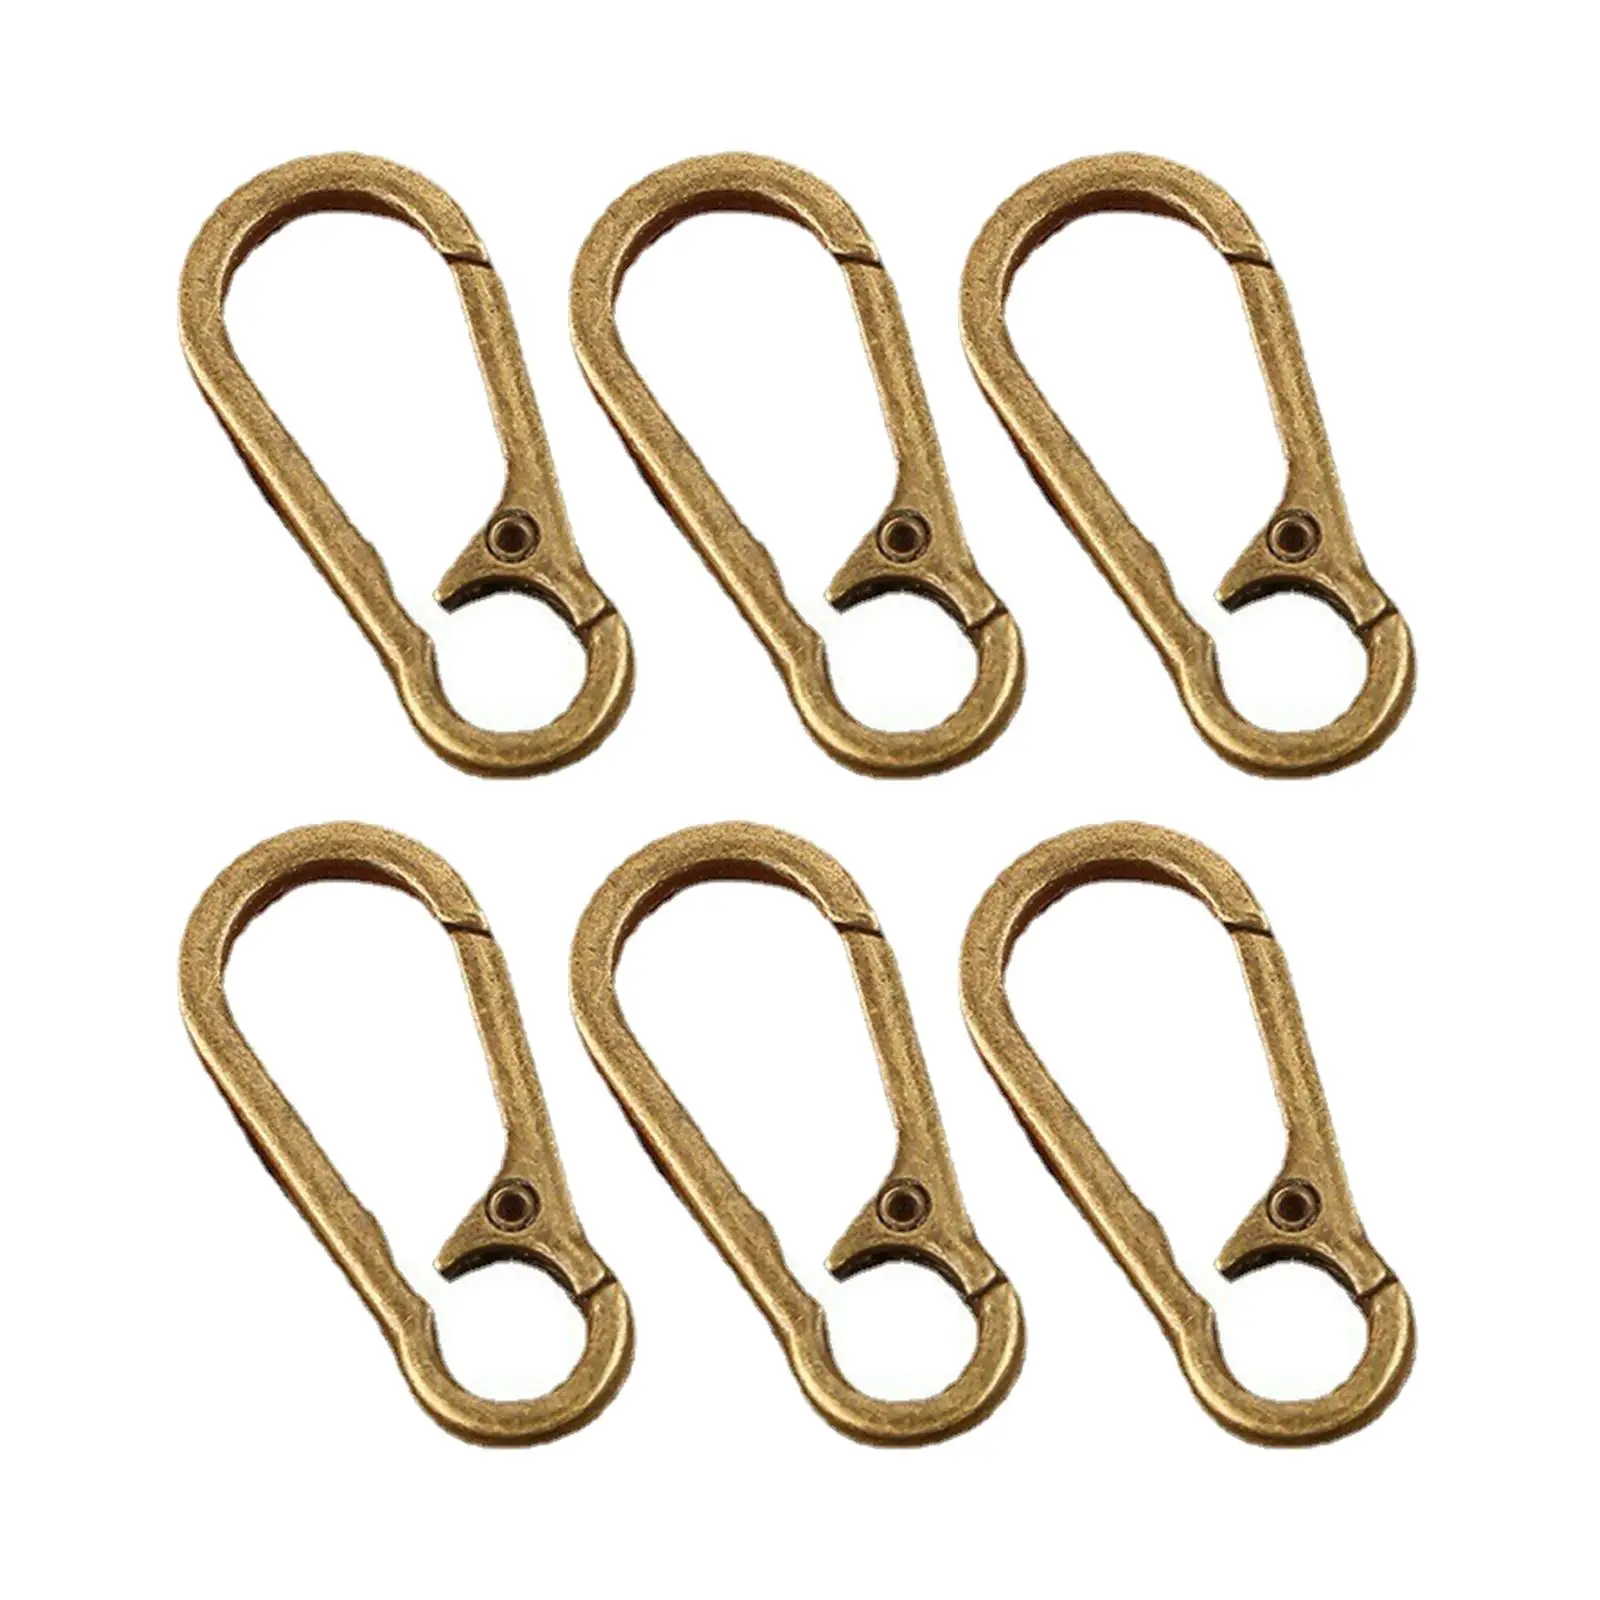 6 Pieces Carabiner Clips Keychain 1.8 inch Distressed Metal Key Clips for Belt